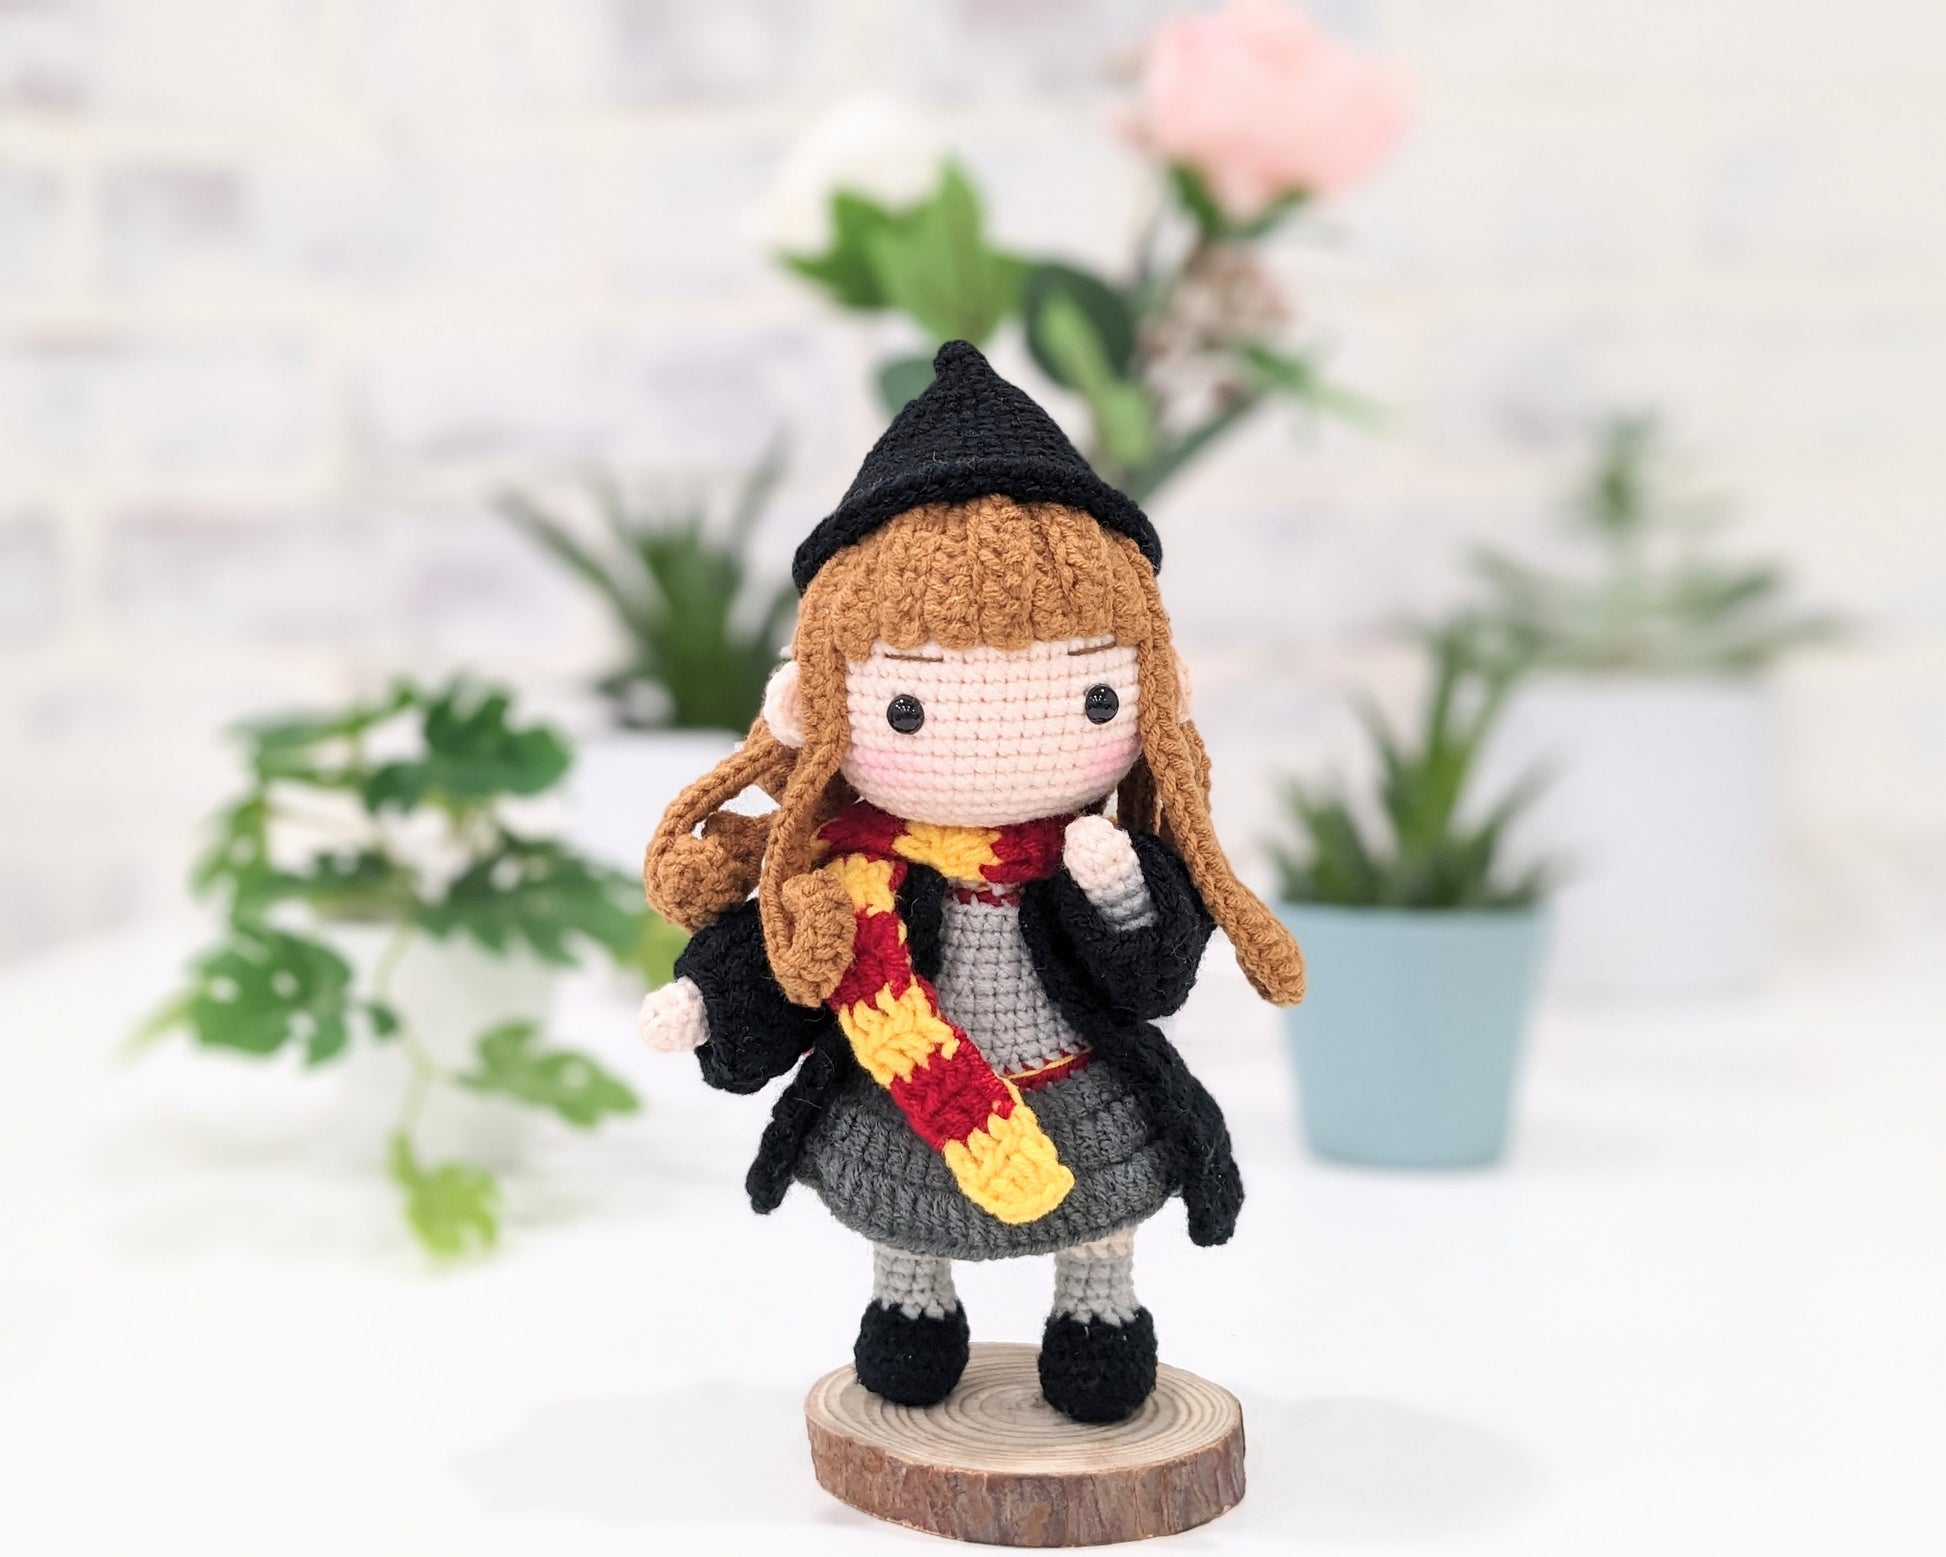 Harry Potter Handmade Crochet Doll and friends Hermione and Ron. Great gift, Amigurumi figures